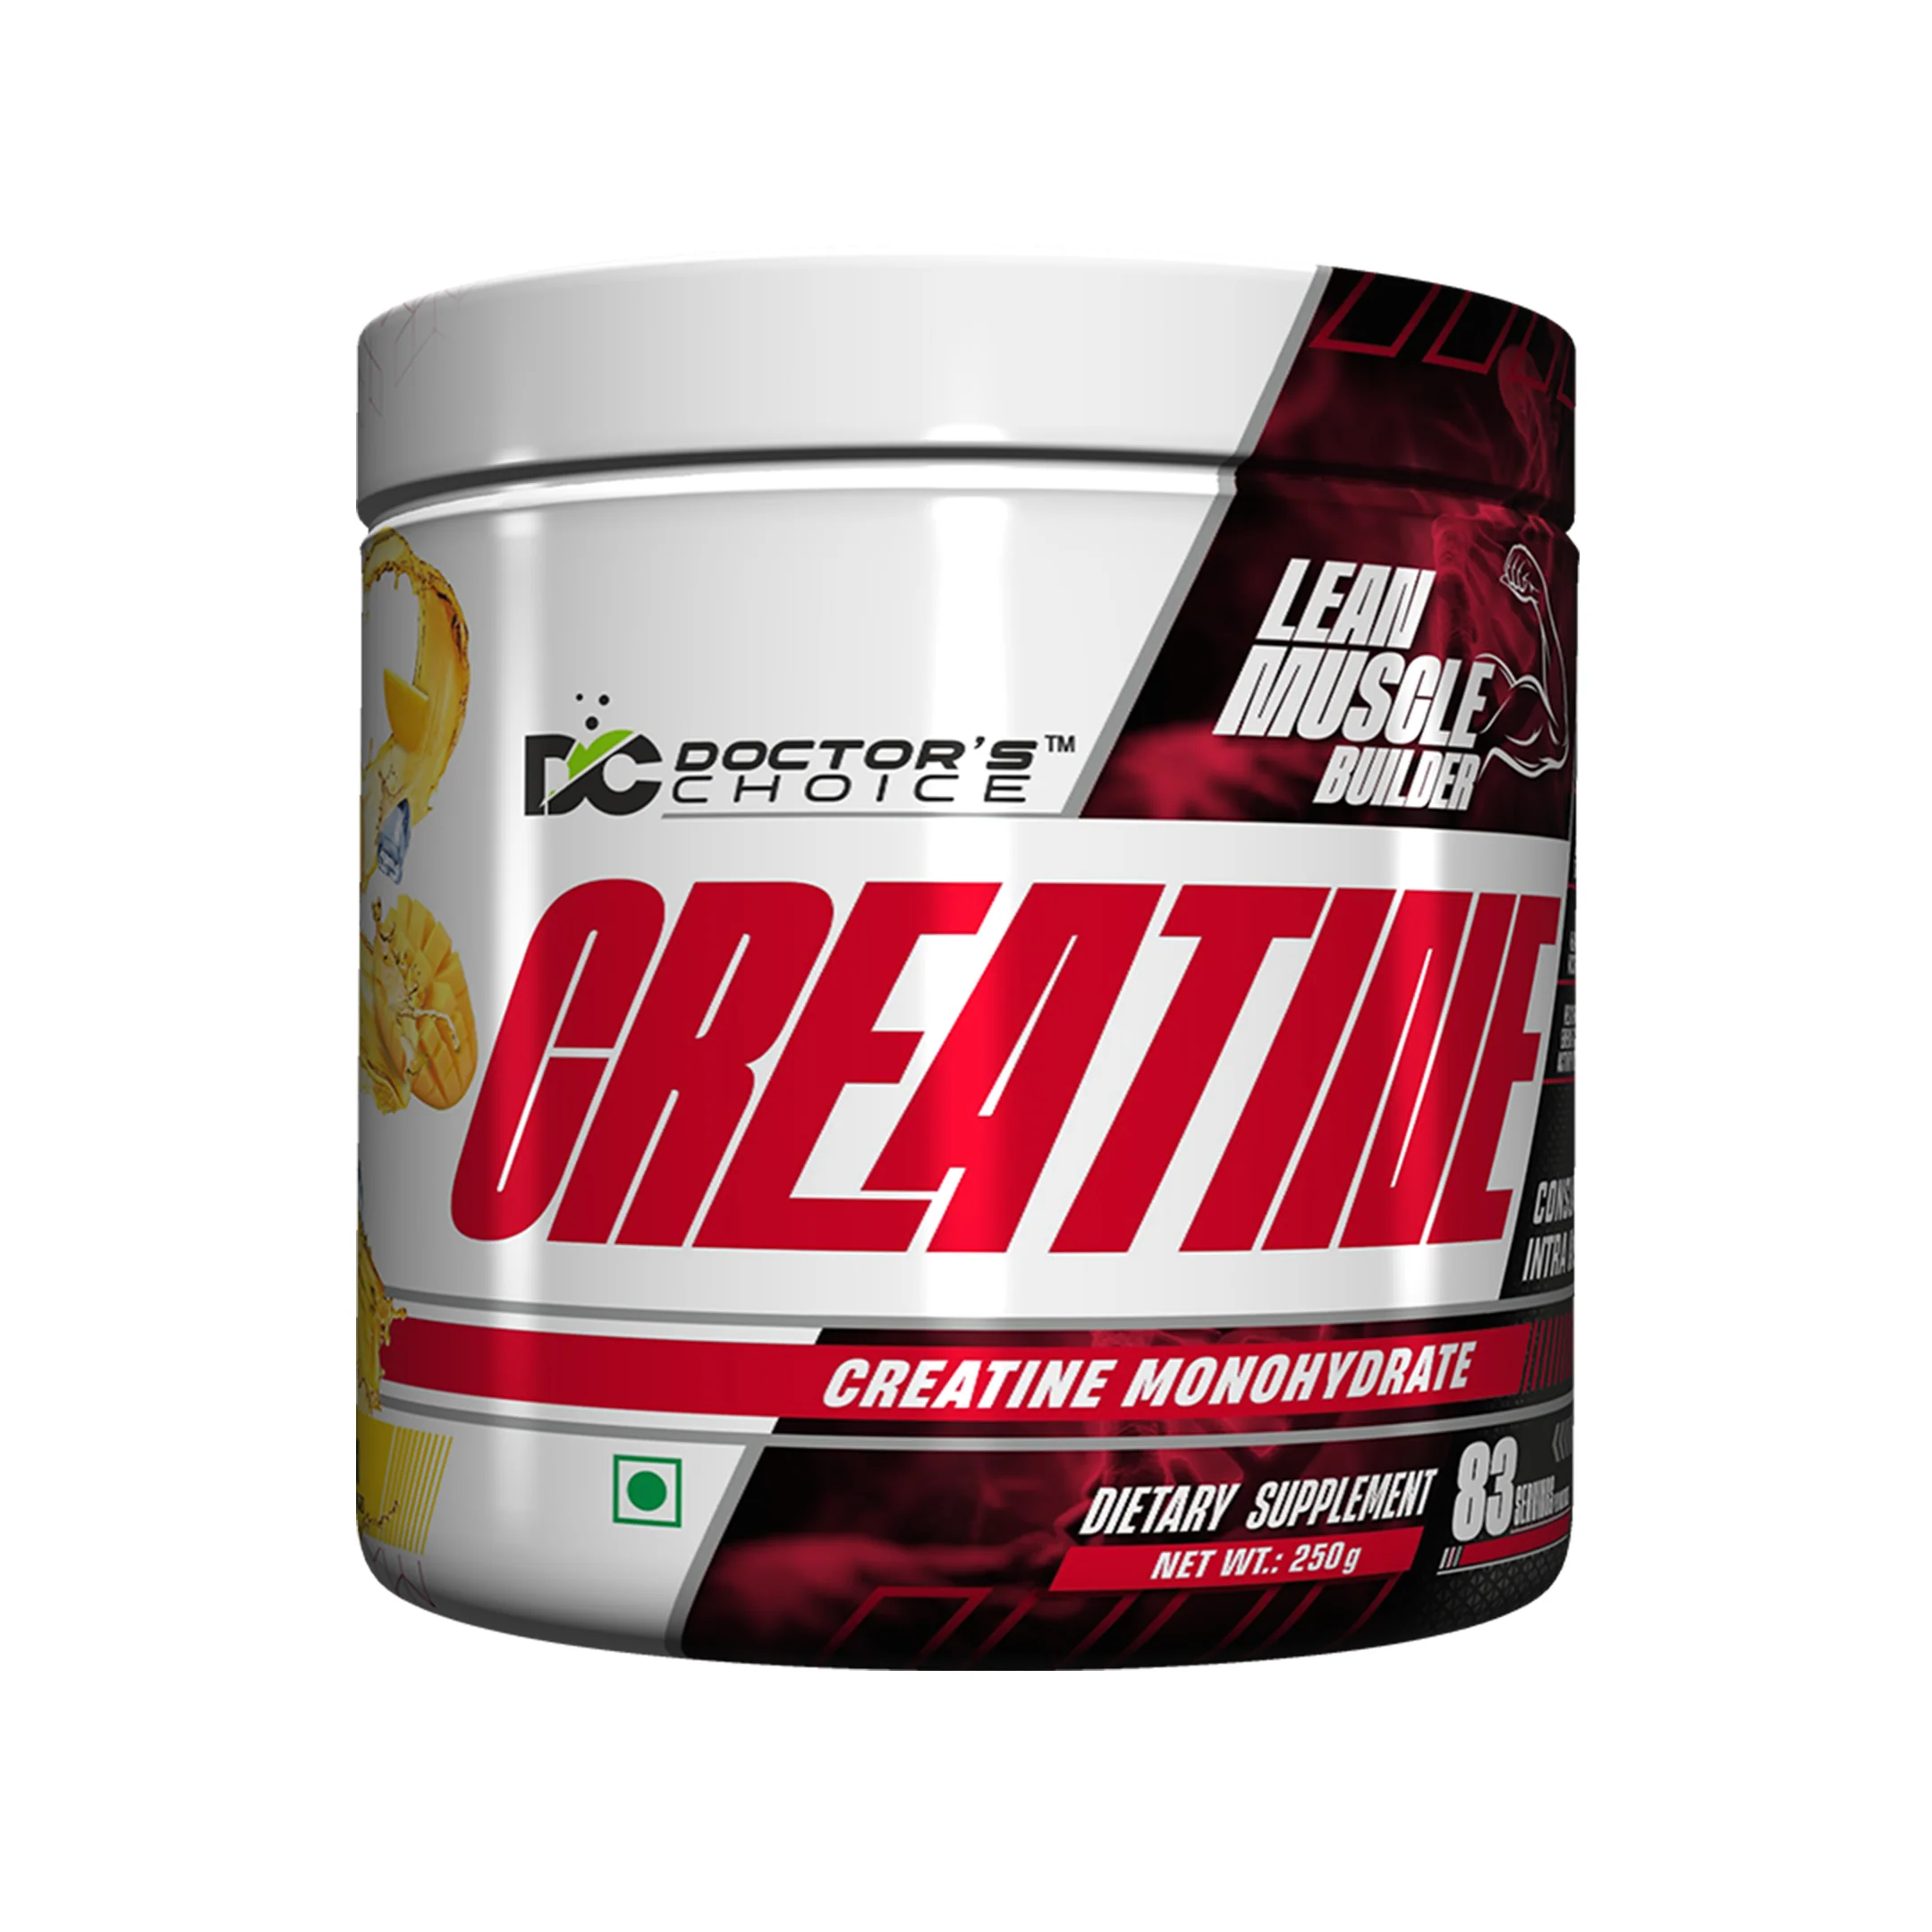 Doctor's Choice Creatine Monohydrate , 250 Gms -83 Servings